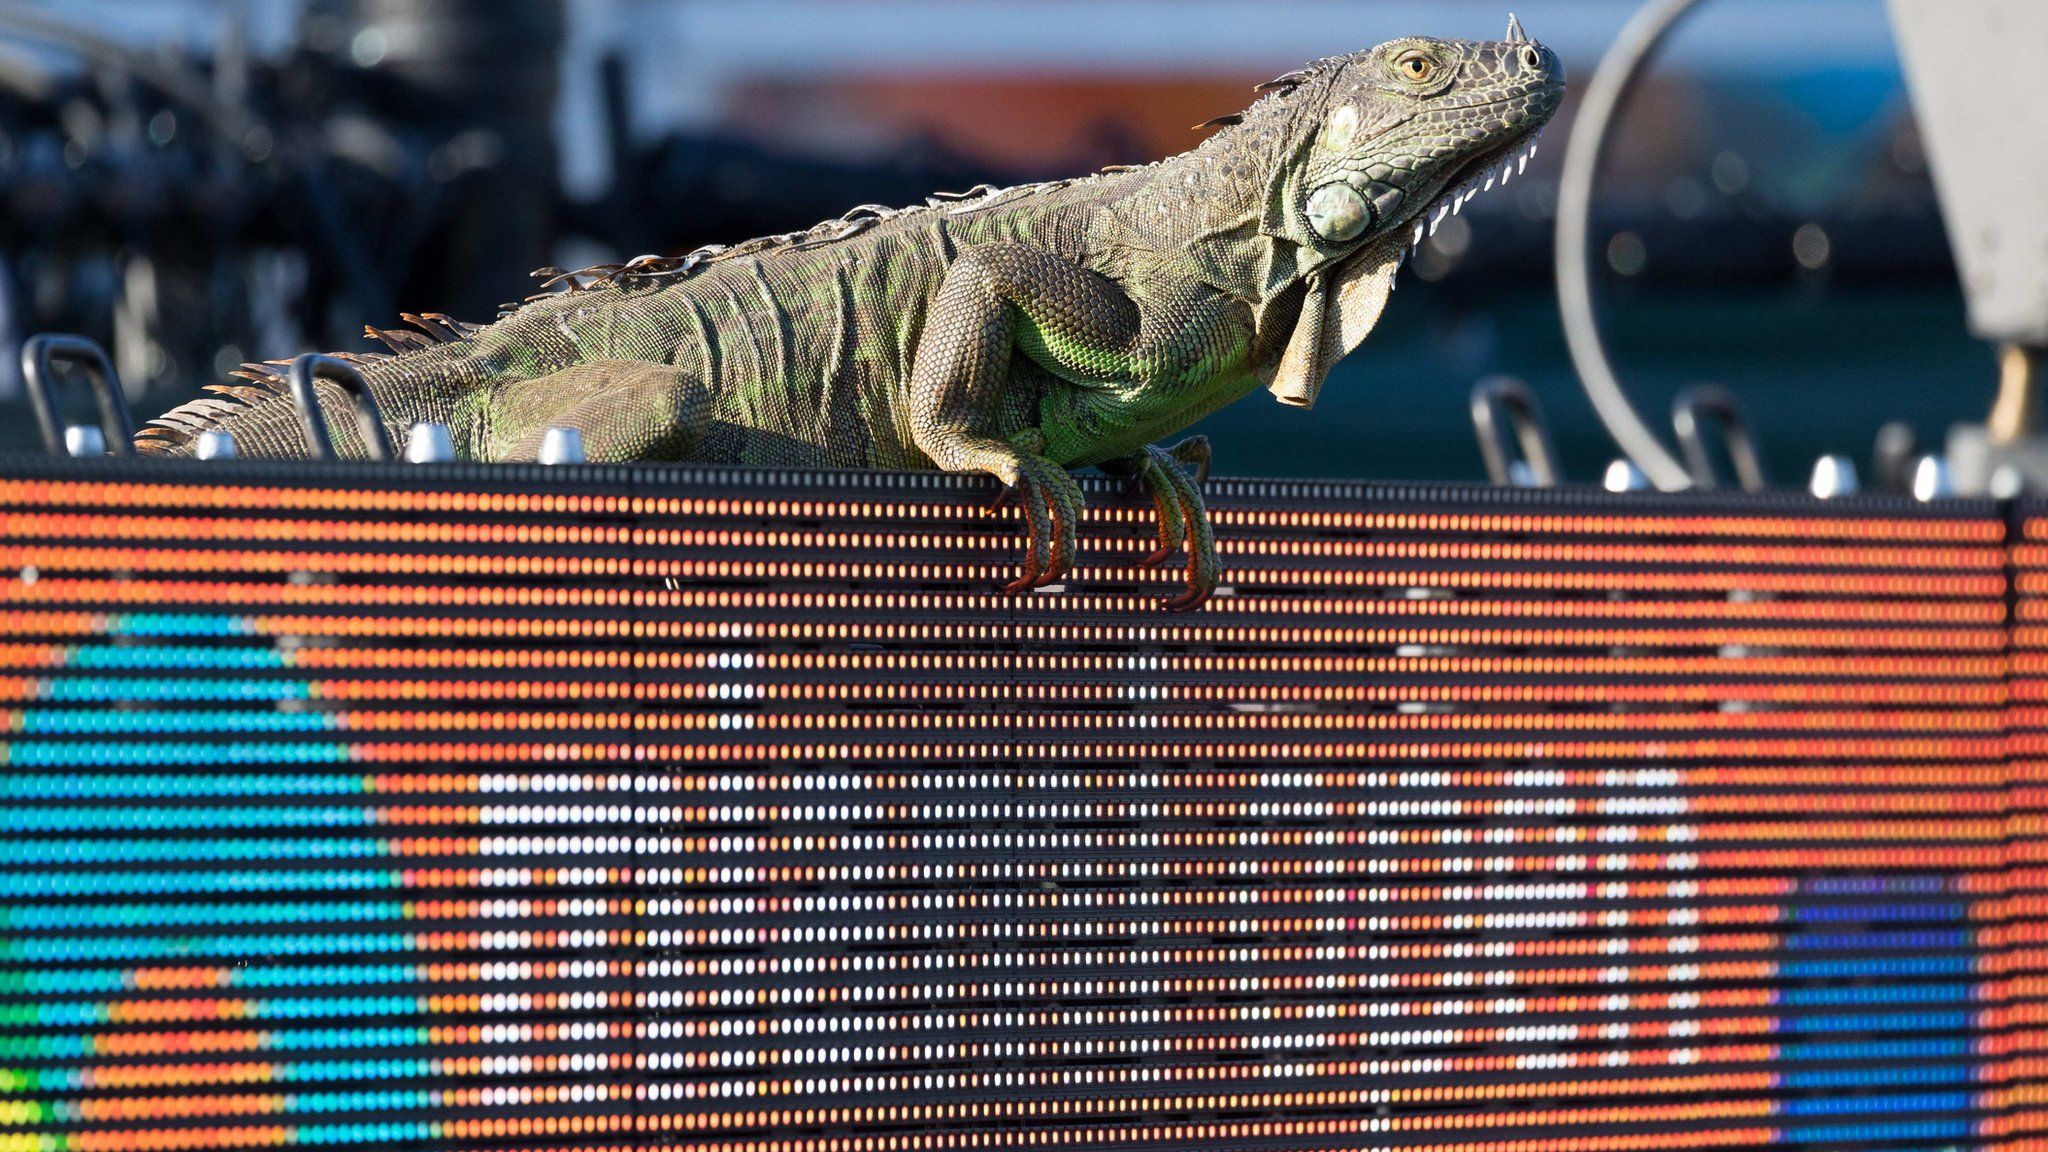 An iguana caused a brief play interruption and commotion in the stands at the Miami Open